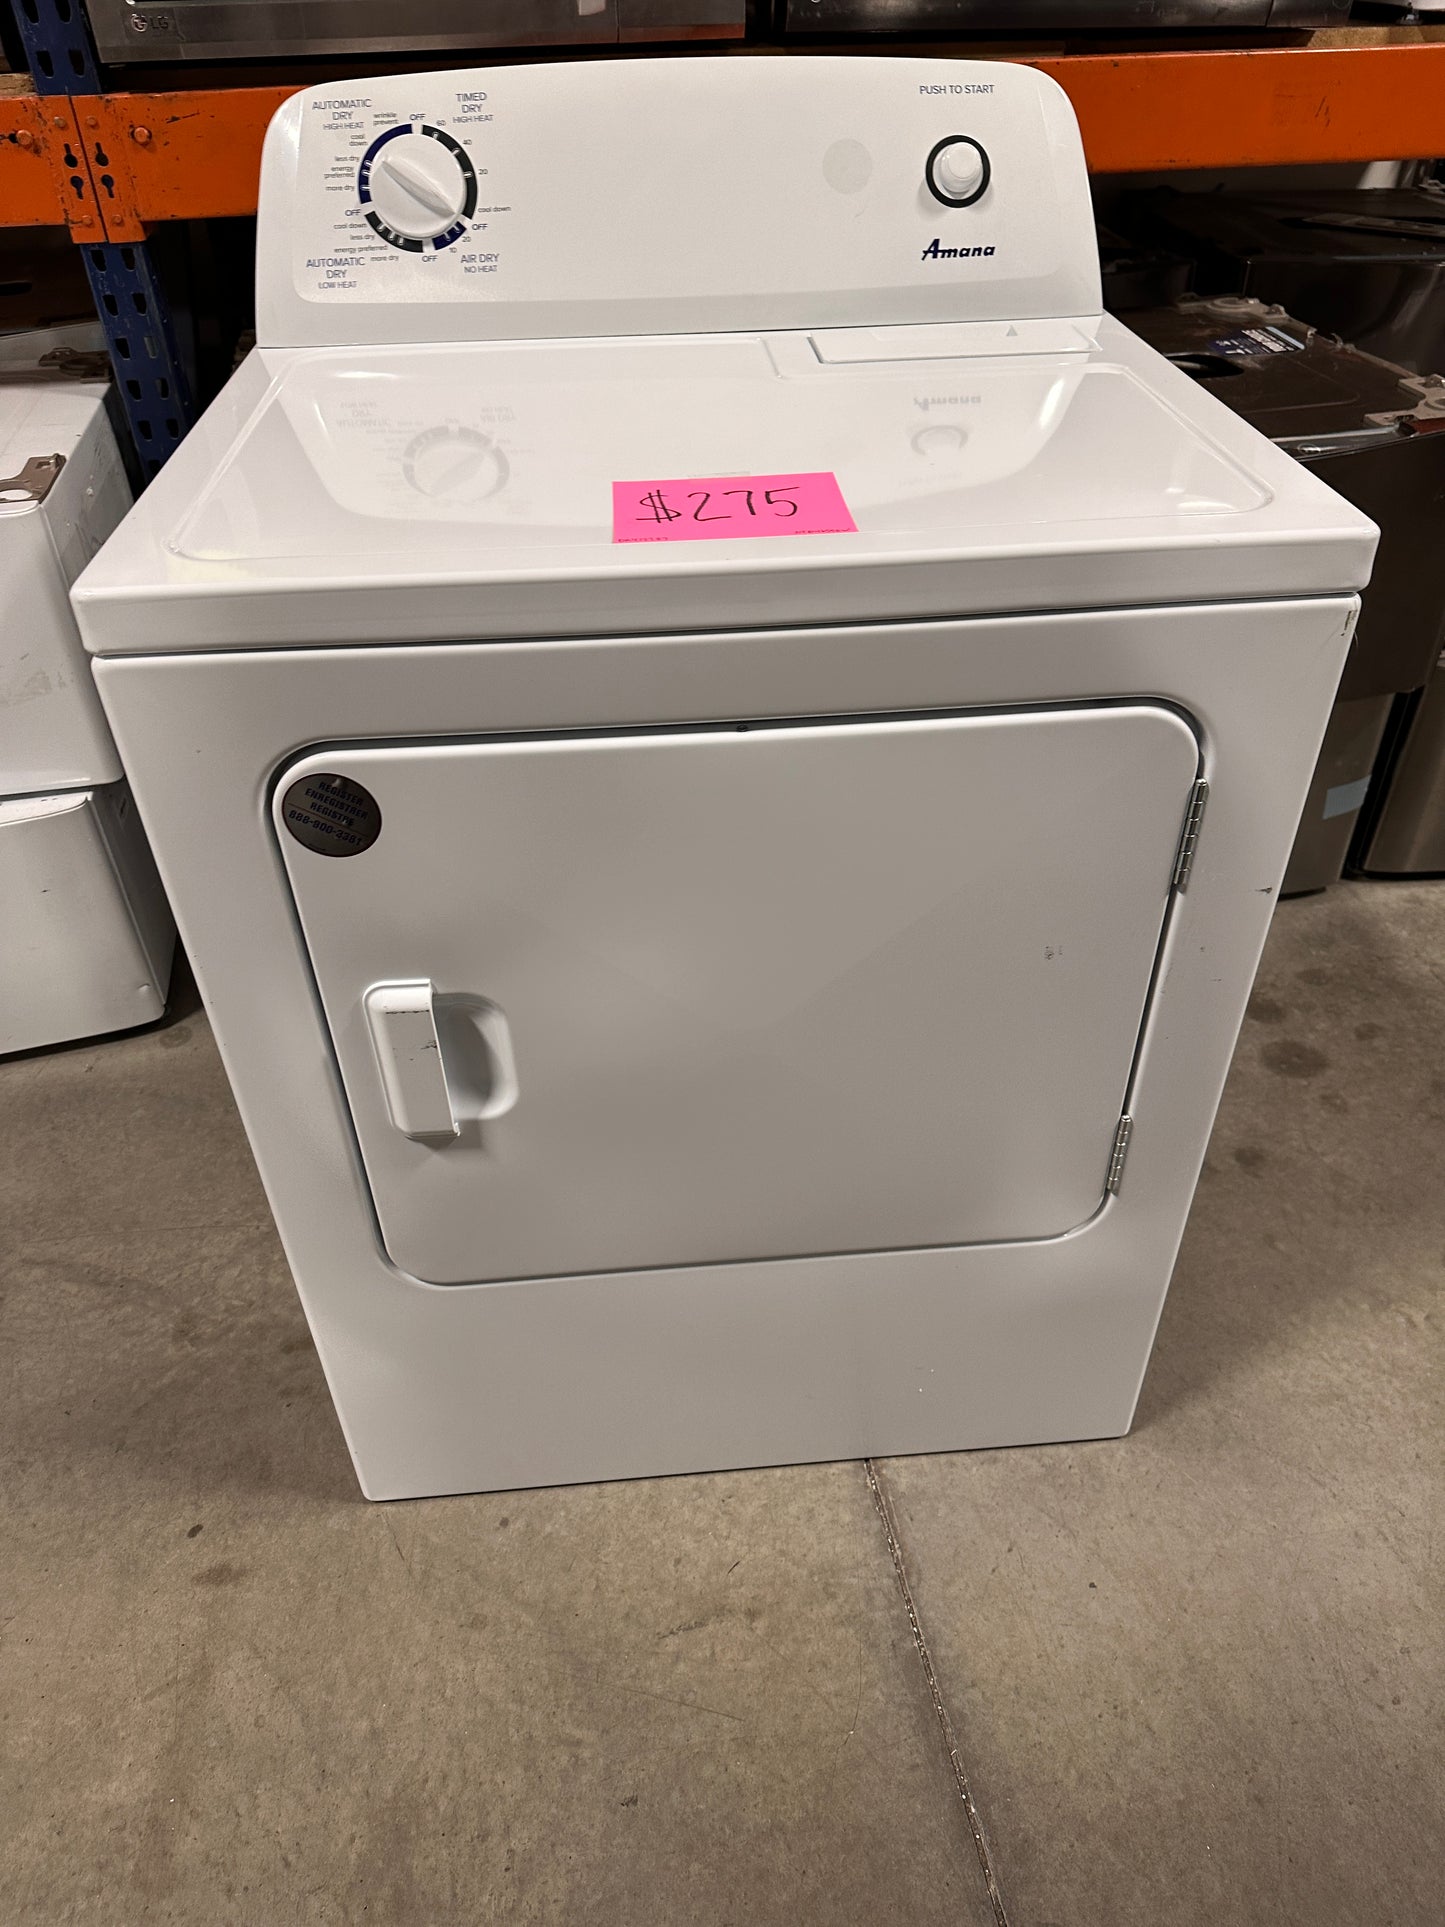 GREAT NEW ELECTRIC DRYER - DRY12287 NED4655EW